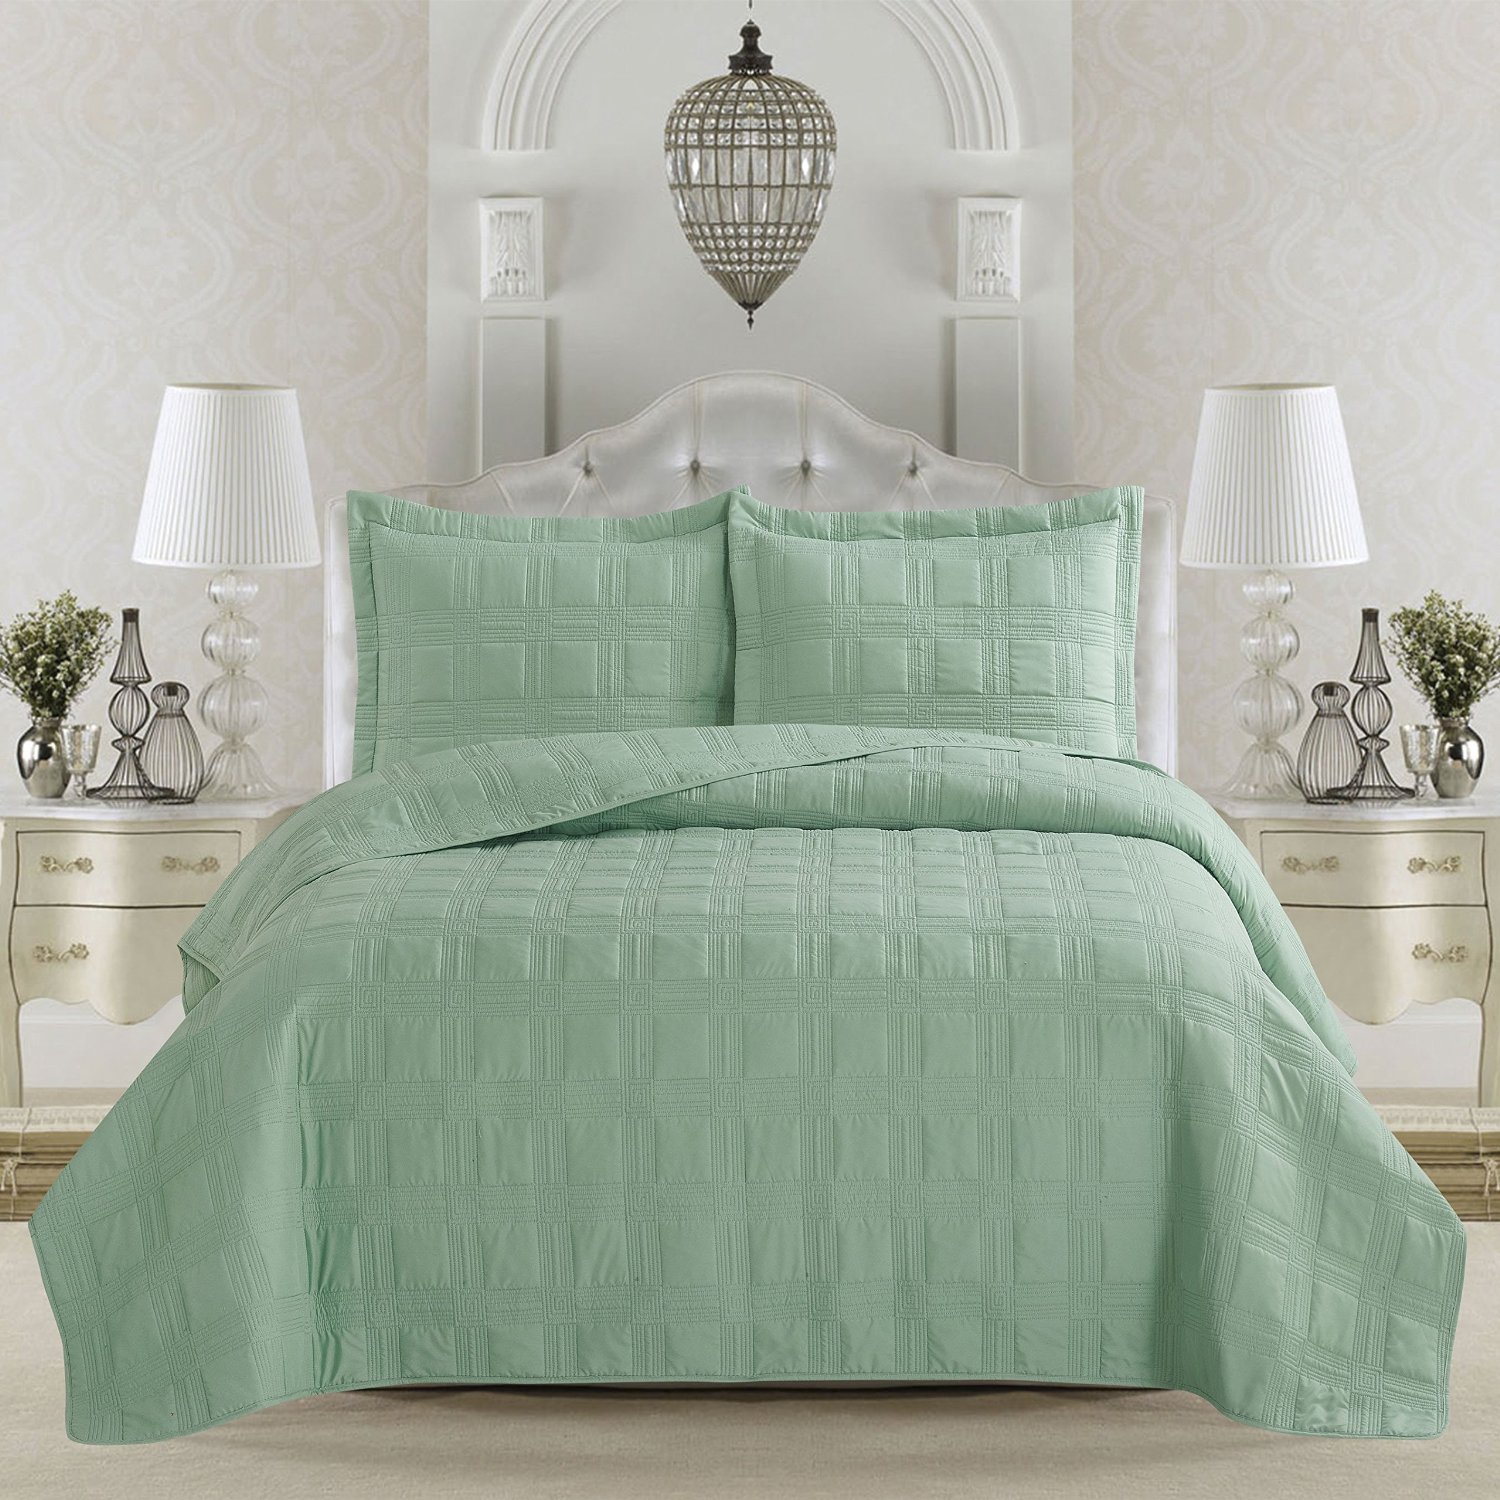 Top 5 Green Bedspreads You Ll Love, Blue And Green Bedspreads Queen